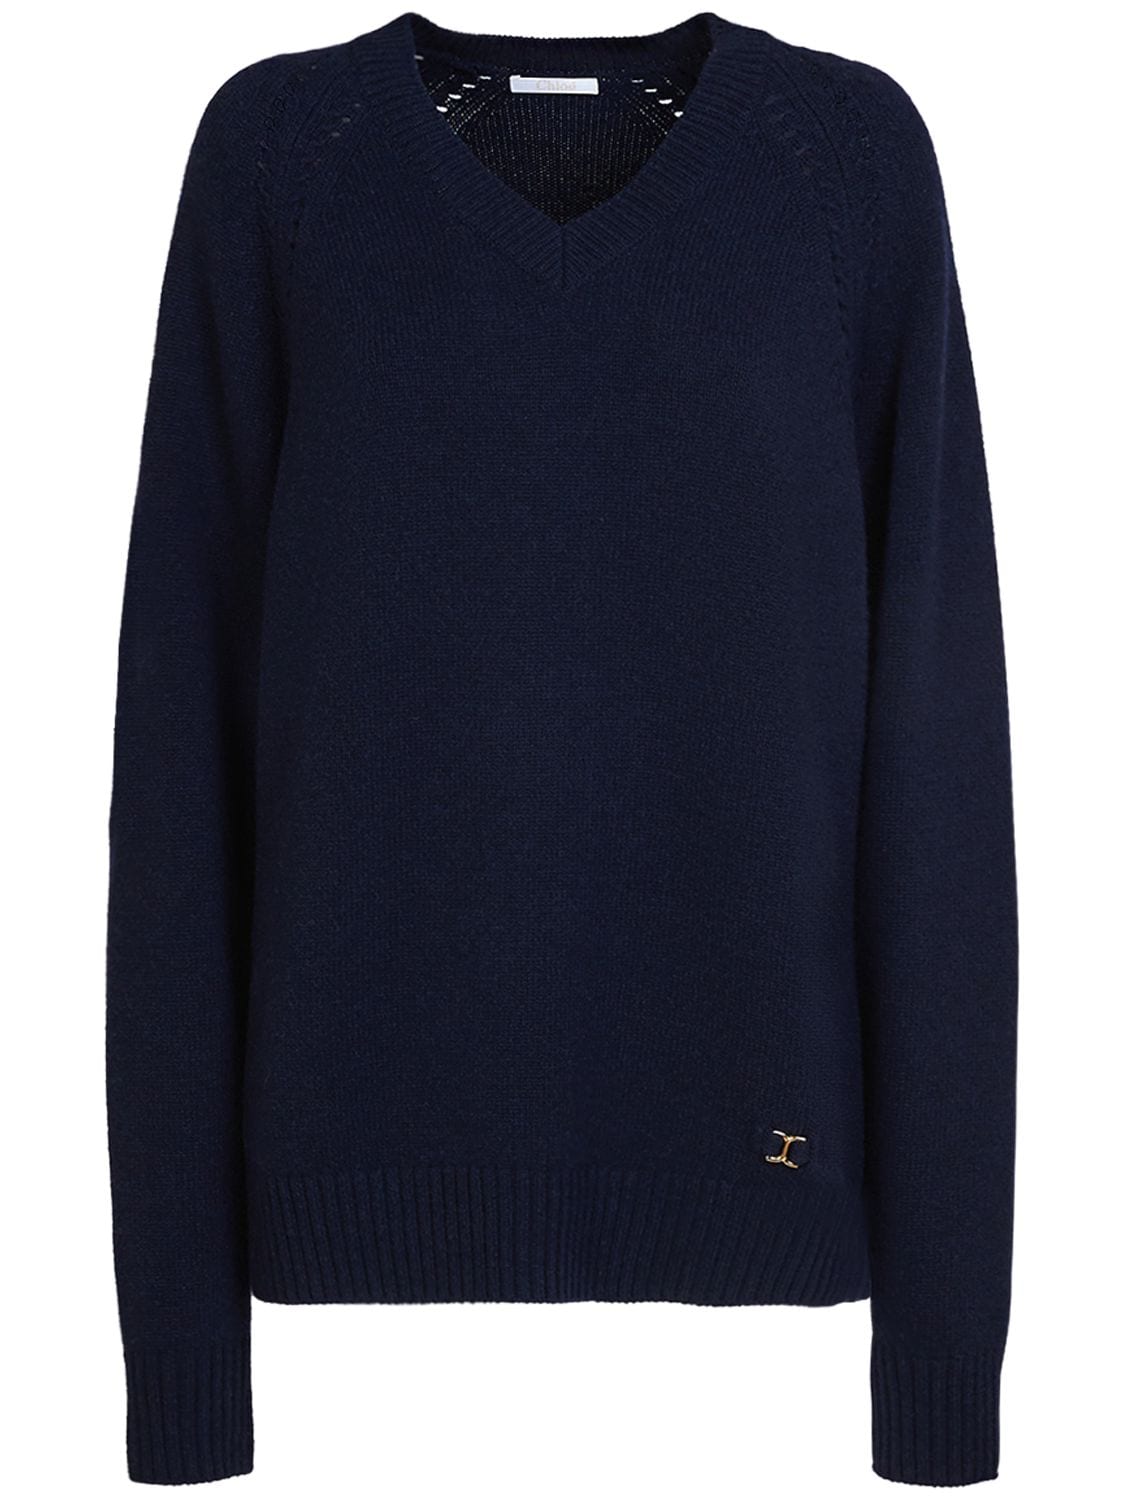 Chloé Cashmere Knit Crewneck Sweater In Navy